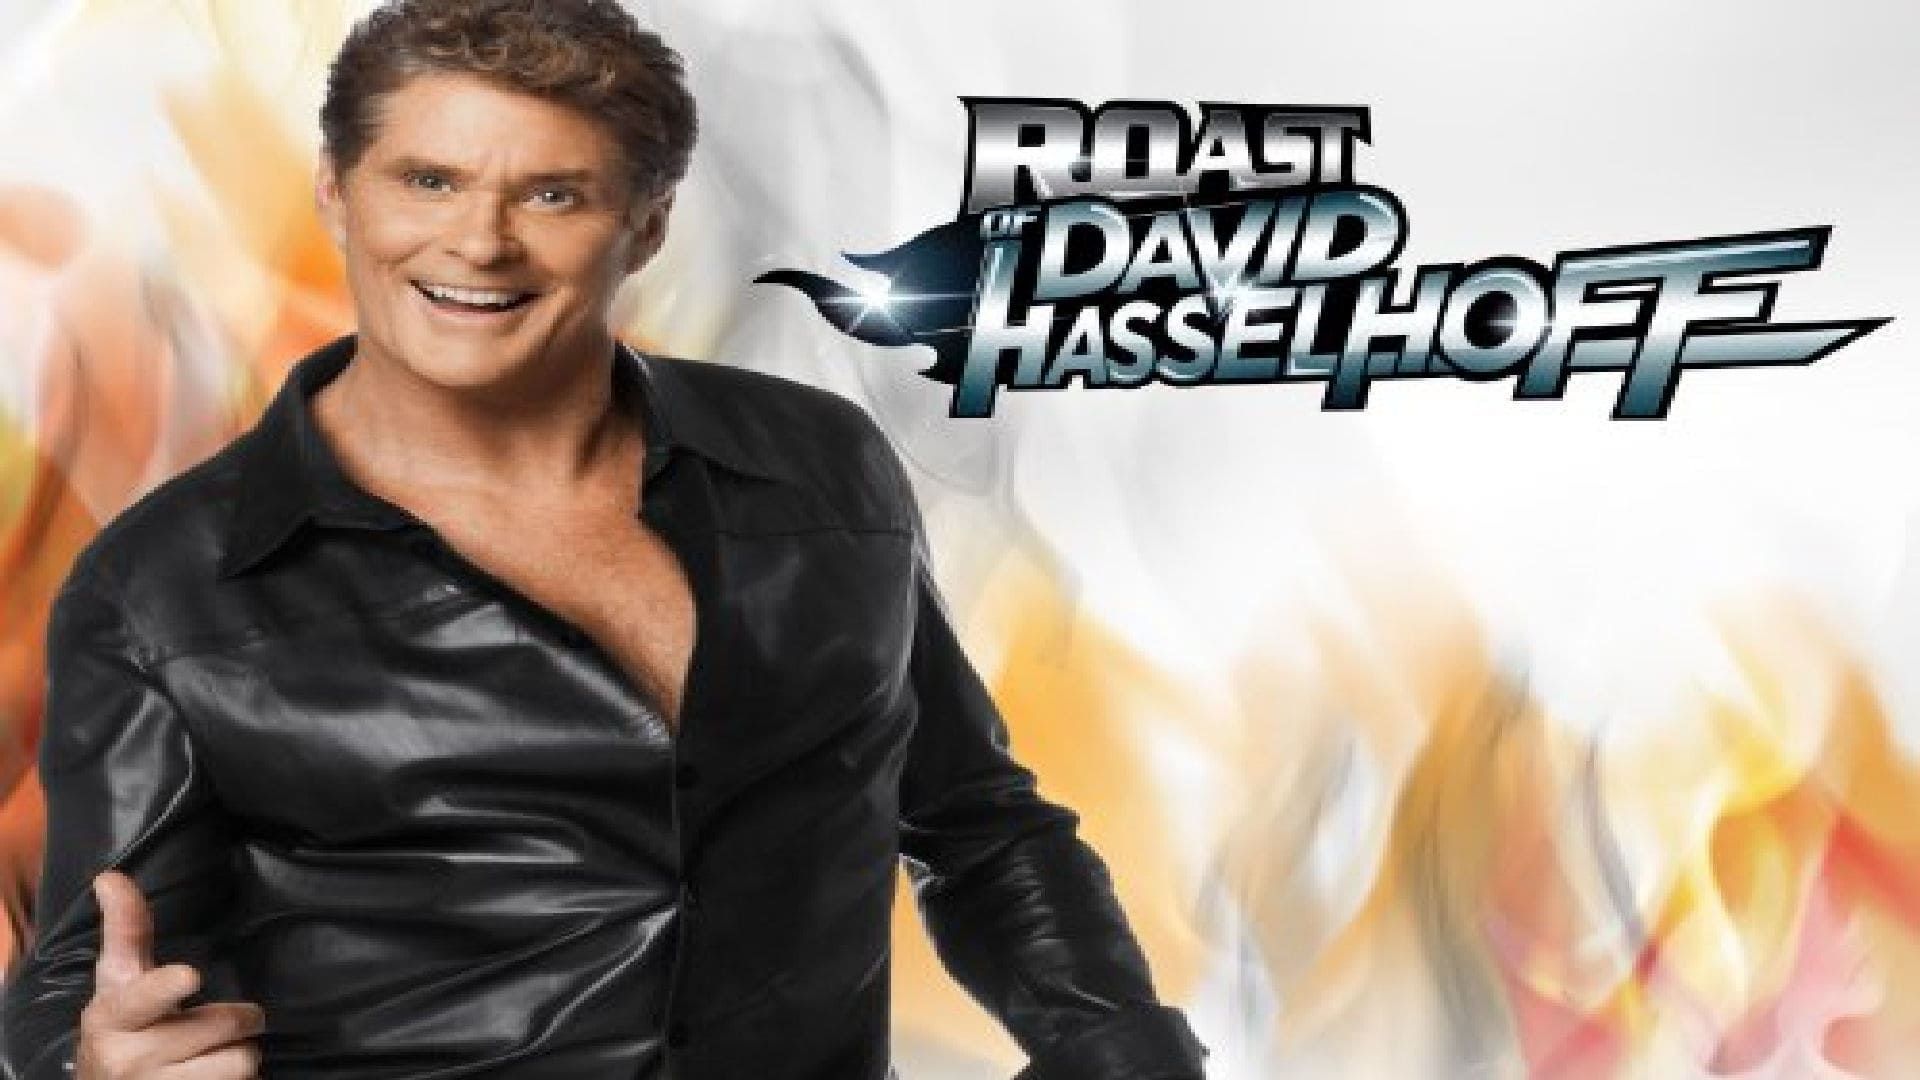 Comedy Central Roast of David Hasselhoff Backdrop